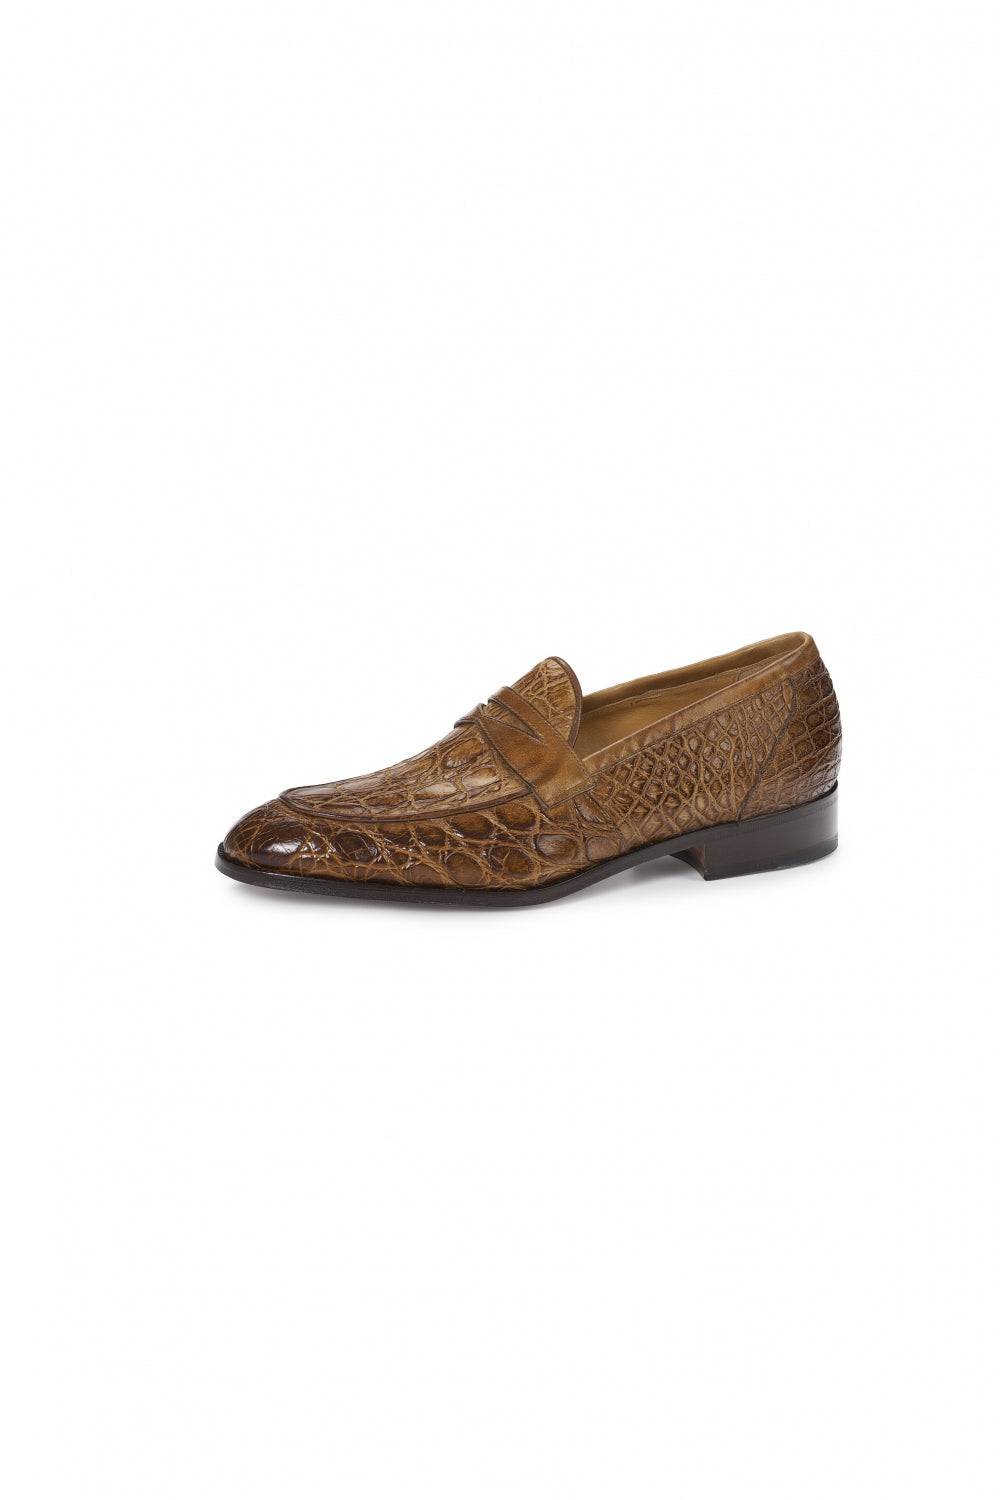 Mauri 4862 Brown Crocodile Belly Penny Loafers - Dudes Boutique